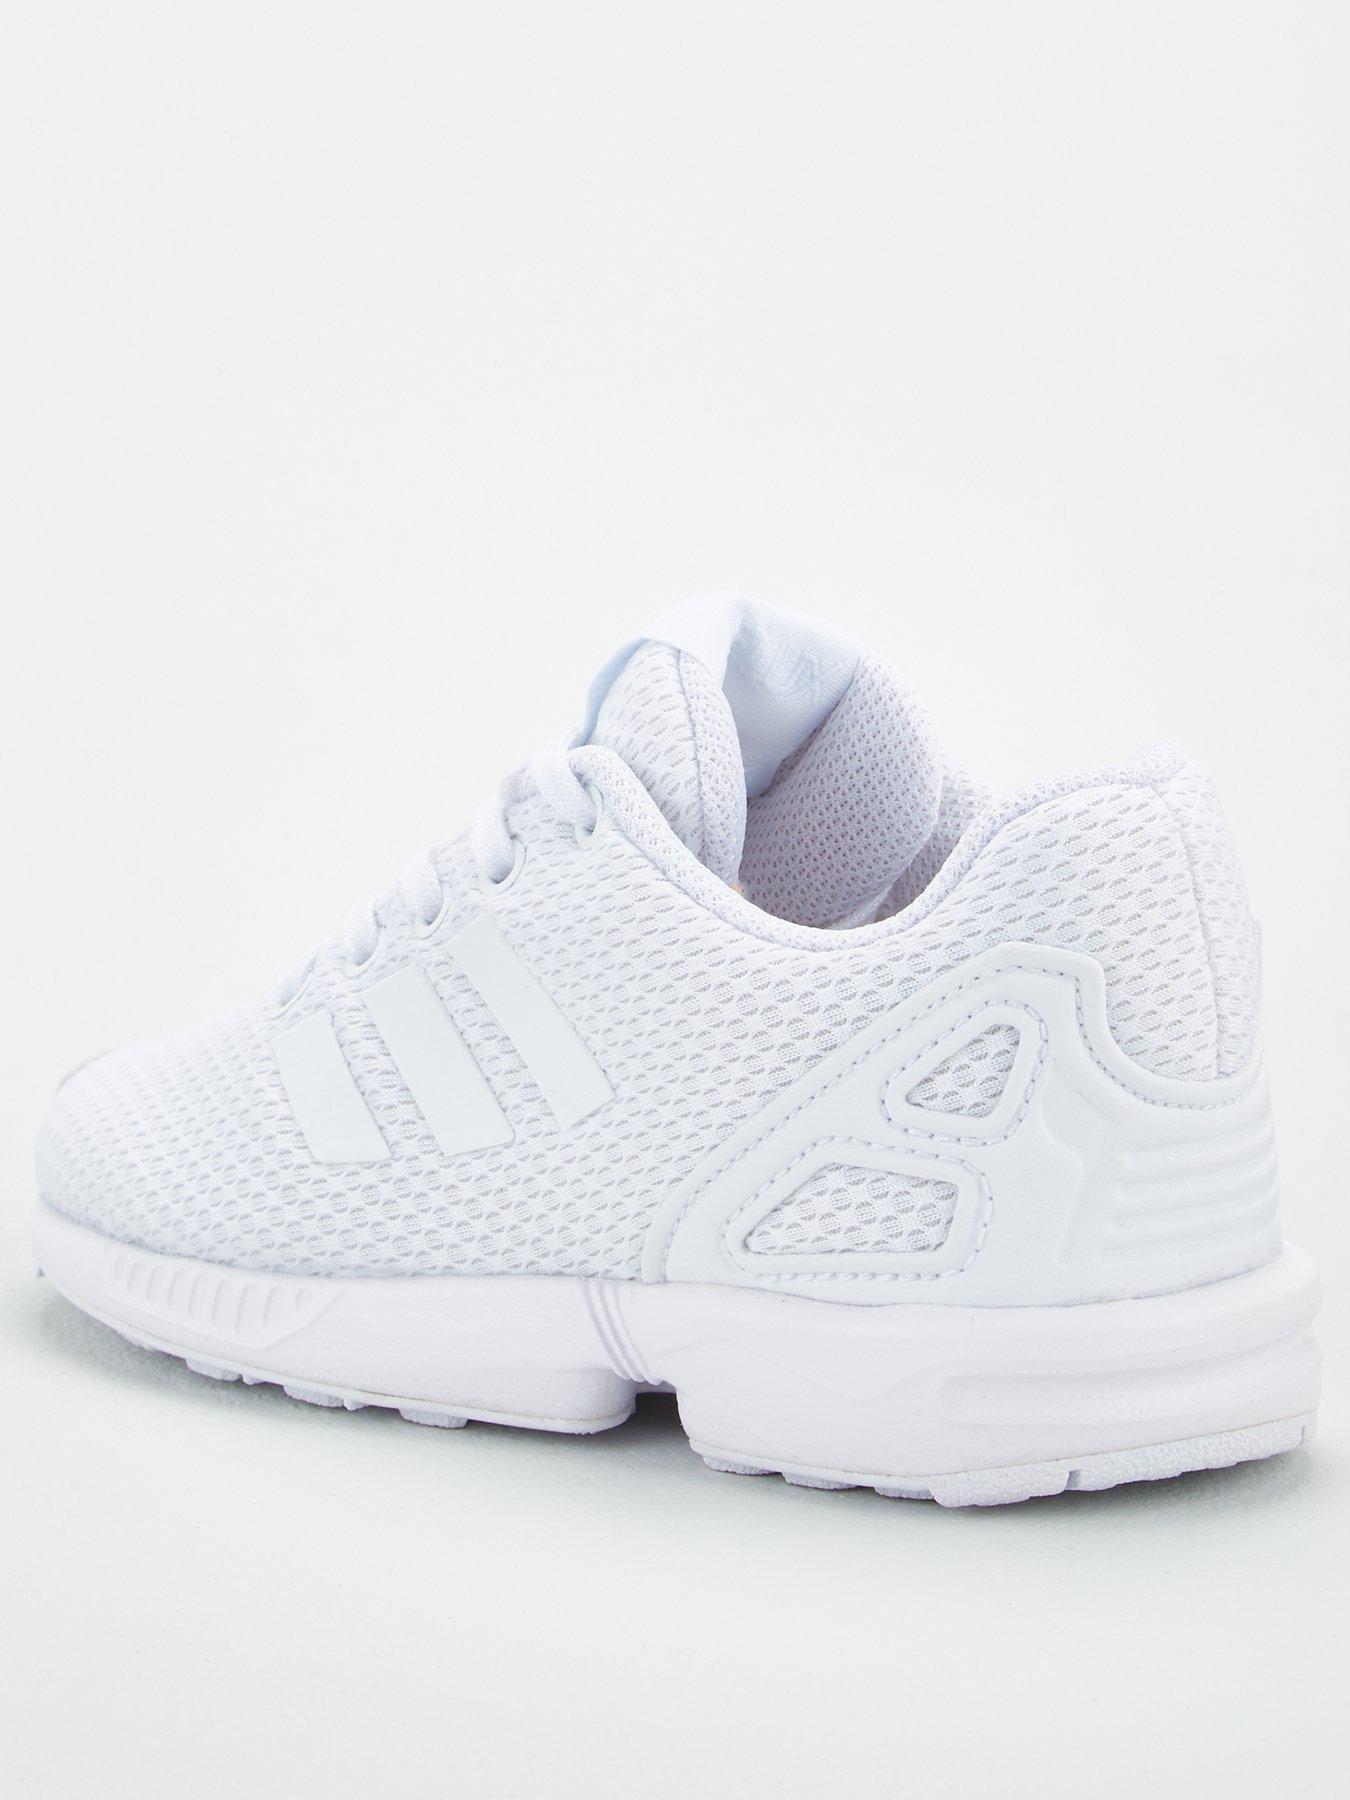 childrens adidas flux trainers